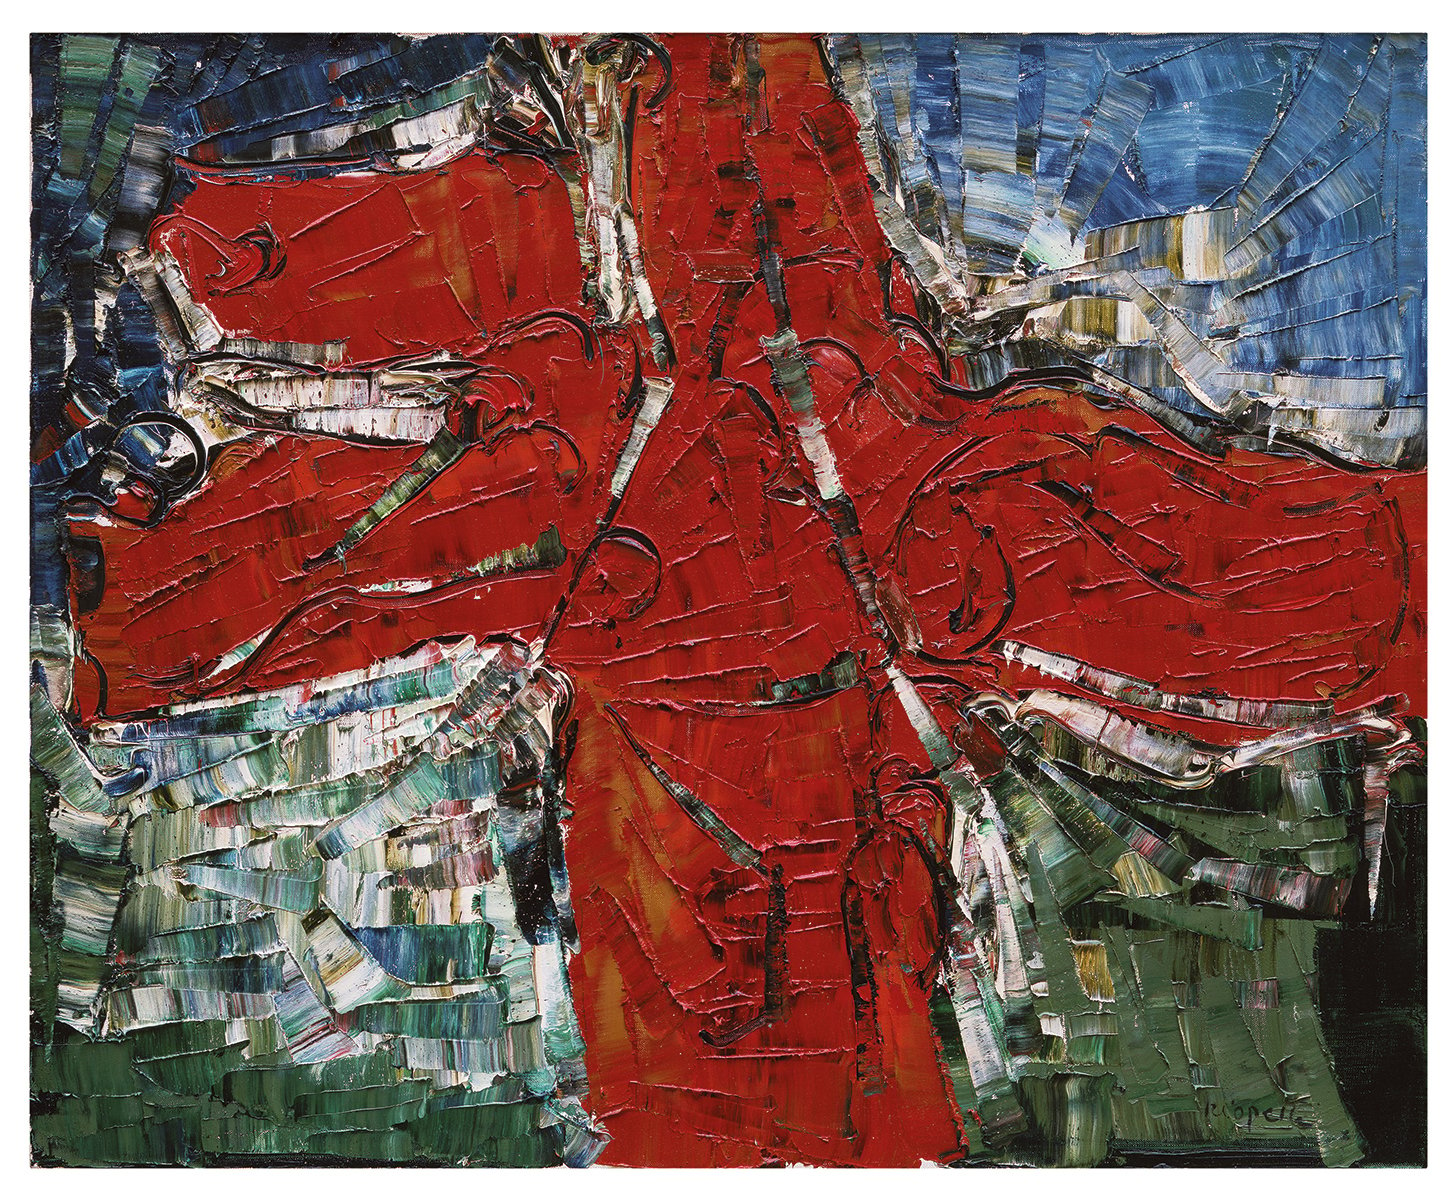 Oil painting, Cap au nord, 1977 by Jean Paul Riopelle, on blue cover, RIOPELLE in darker blue font to bottom edge.